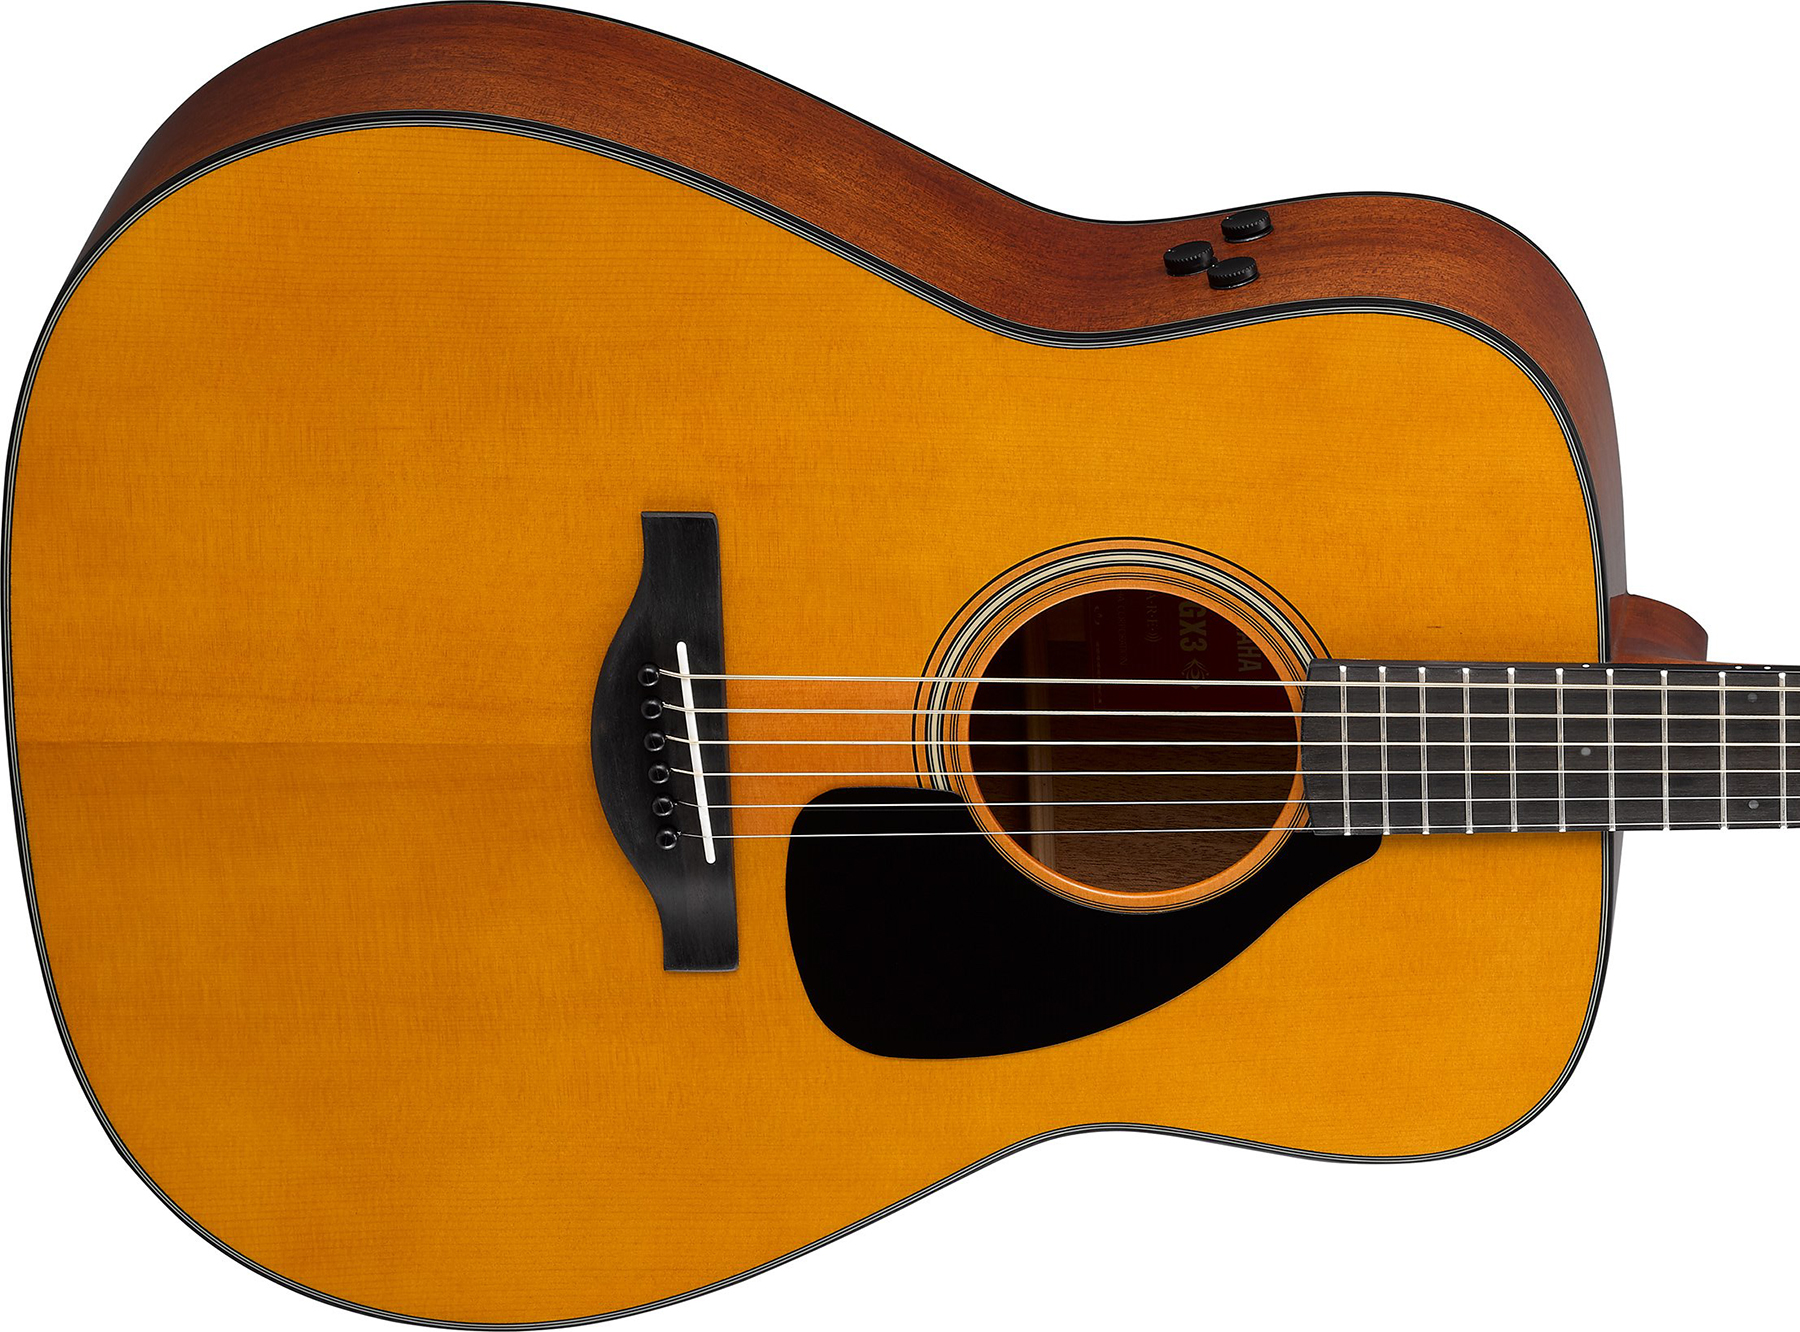 Yamaha Fgx3 Red Label Dreadnought Epicea Palissandre Eb - Heritage Natural - Guitare Acoustique - Variation 2